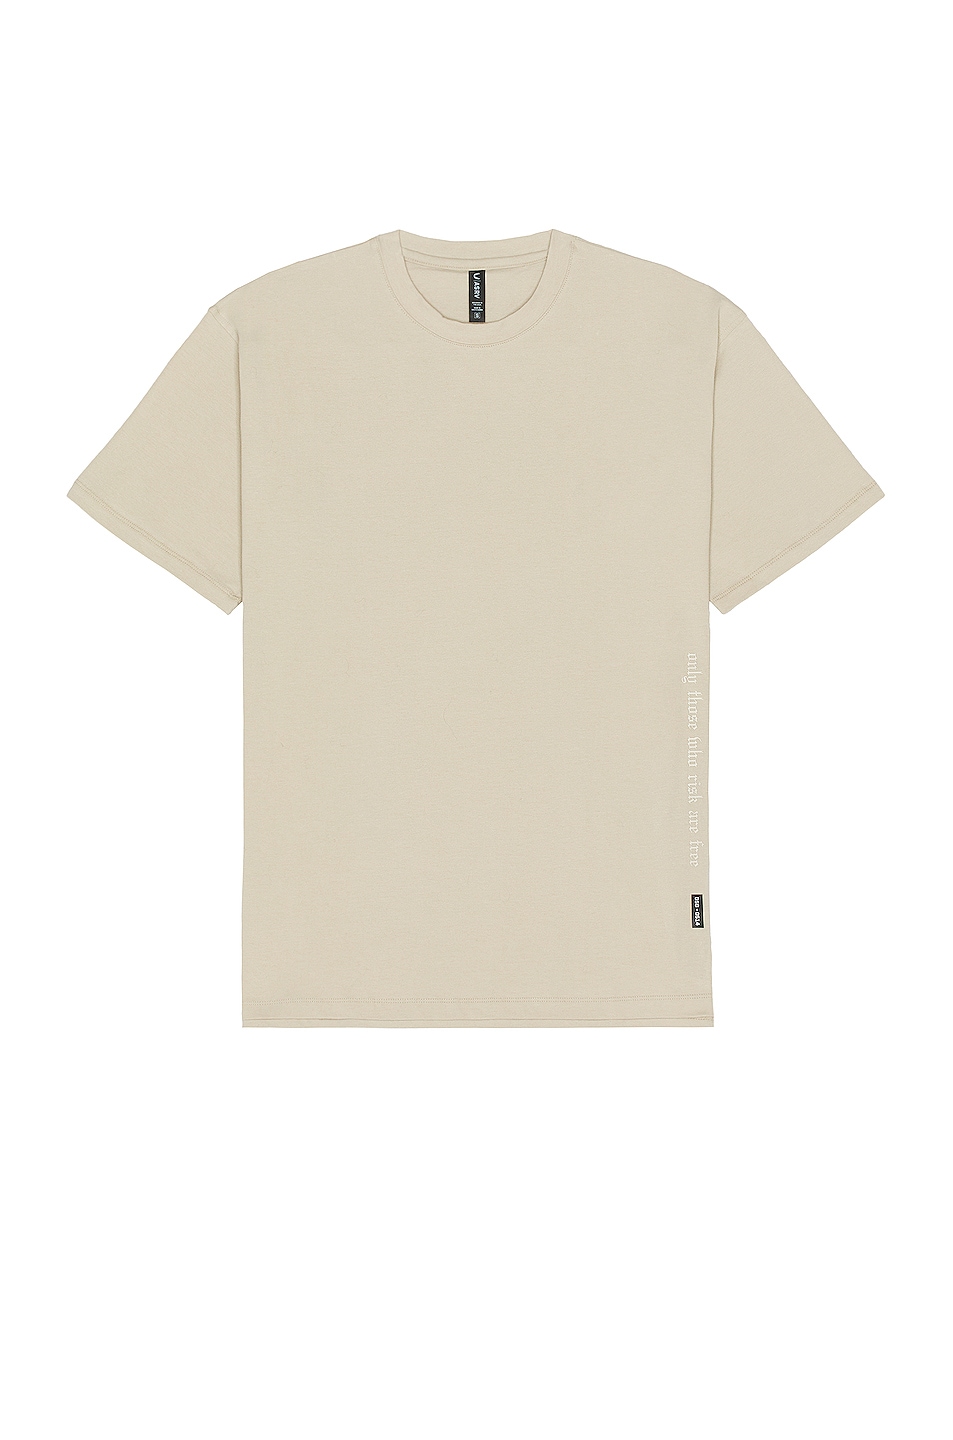 Image 1 of ASRV Cotton Plus Oversized Tee in Sand Smoke